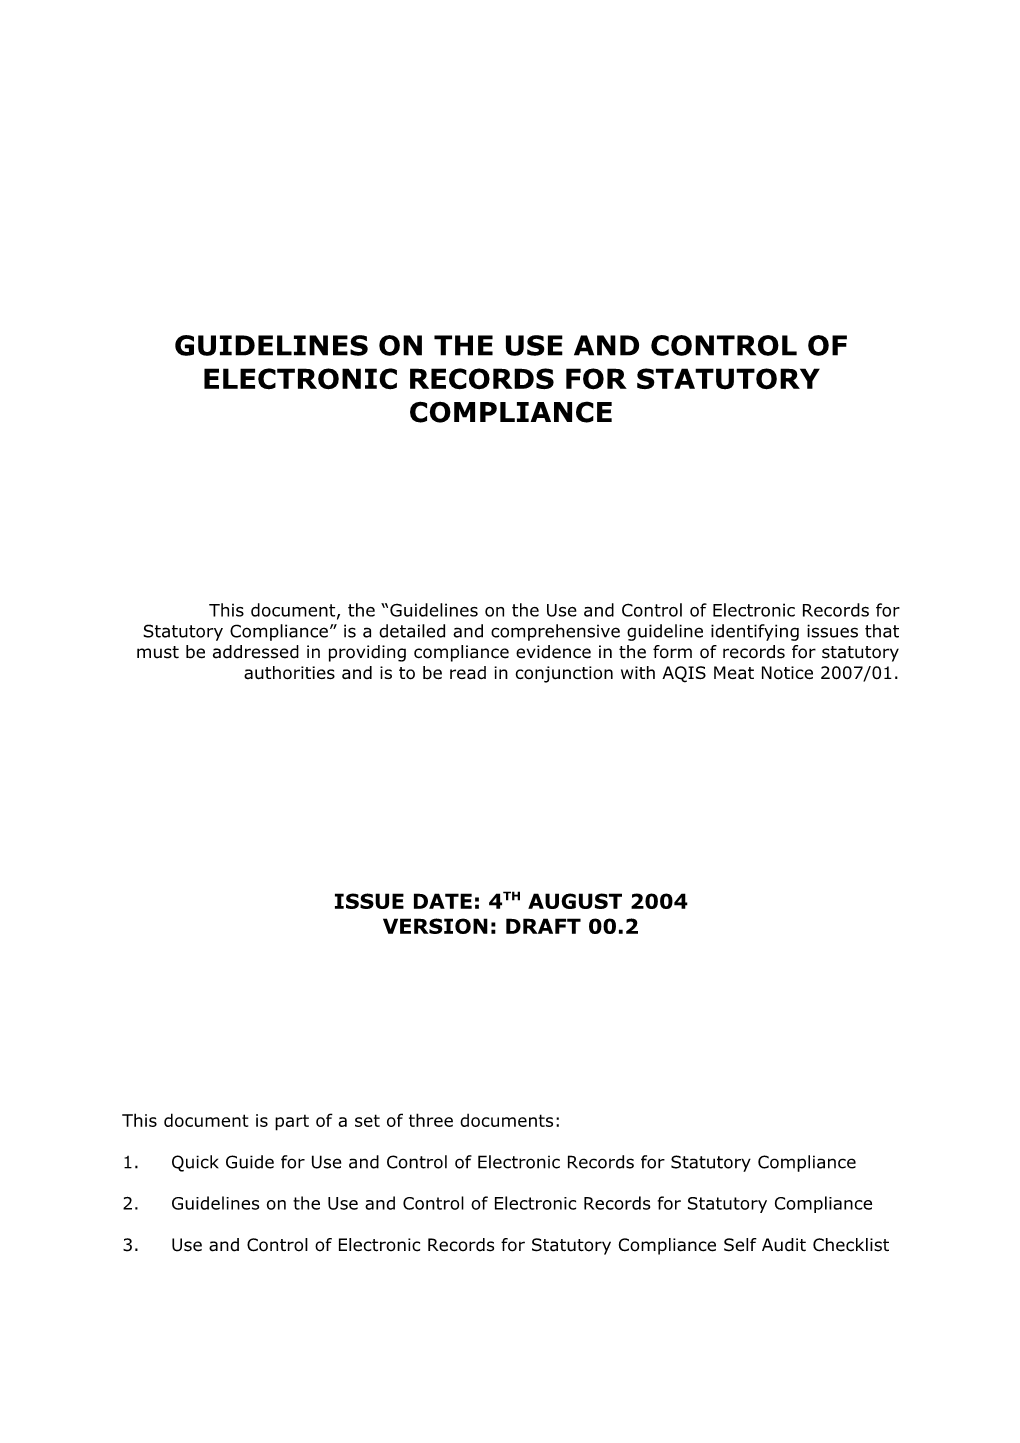 Guidelines on the USE and CONTROL of ELECTRONIC RECORDS for STATUTORY COMPLIANCE